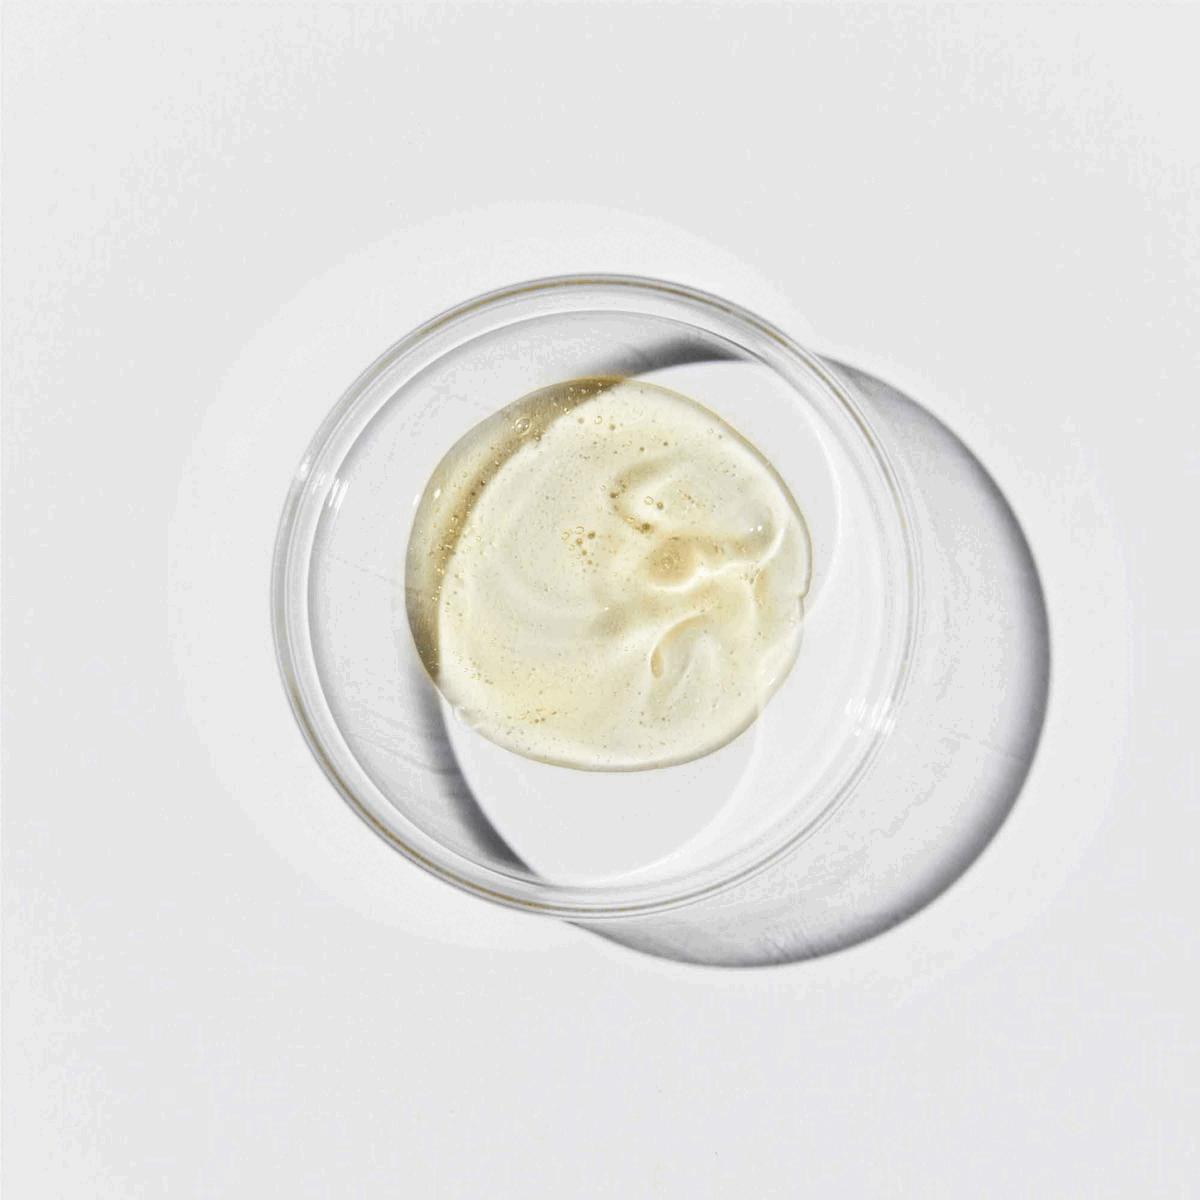 Gif of different petri dishes to showcase textures of the products inside Cultured Discovered Kit.